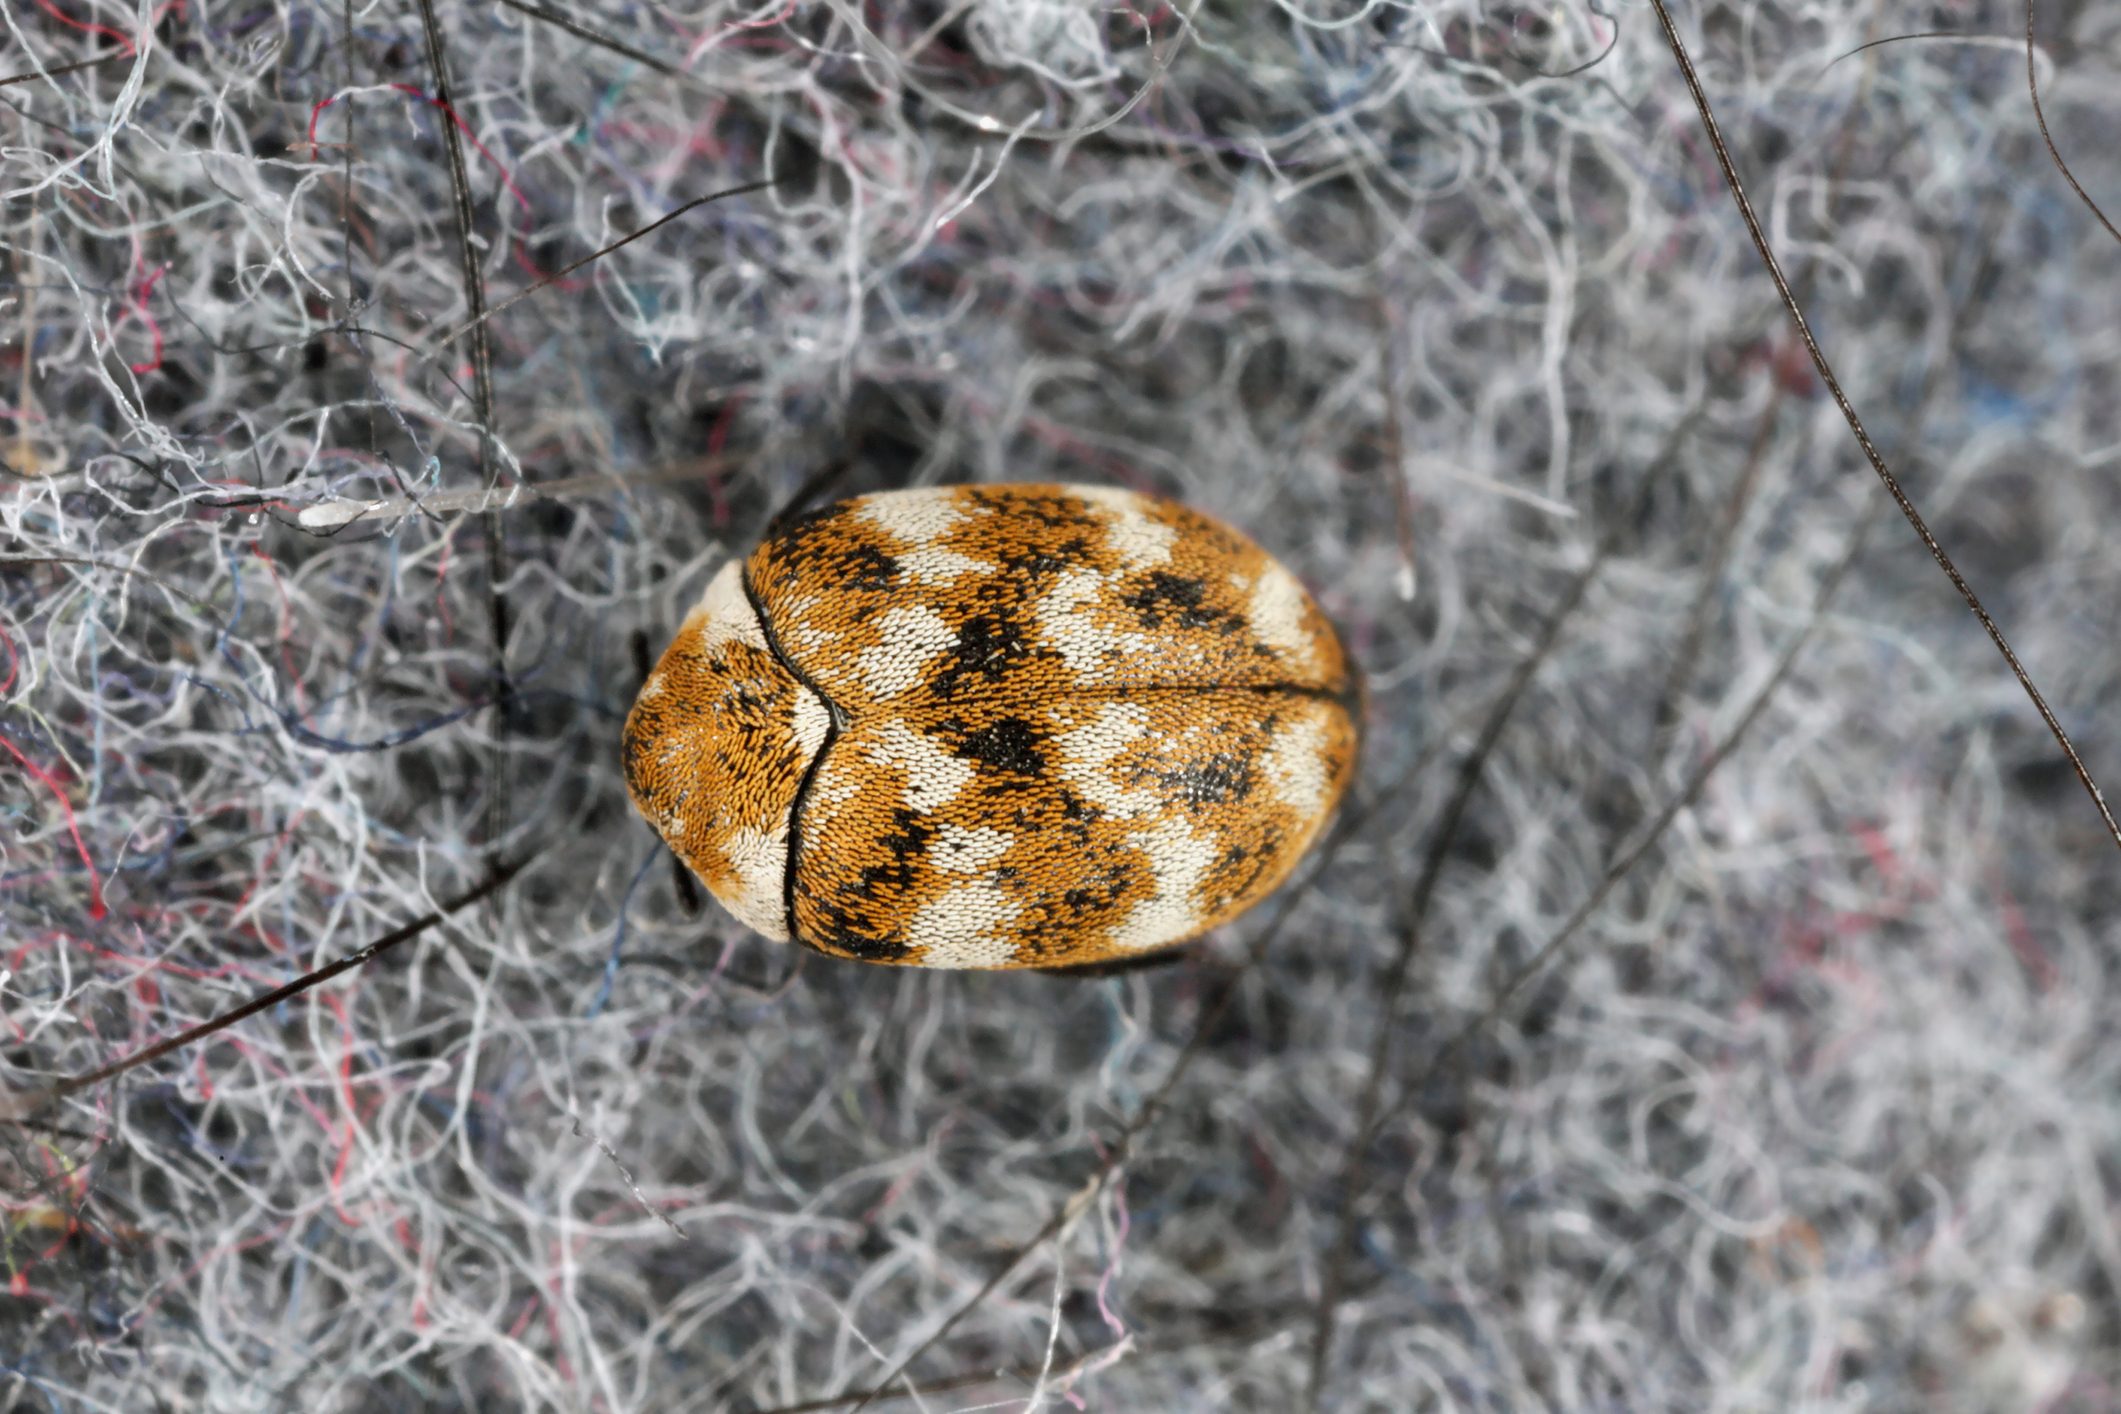 Carpet Beetle: How to Identify and Get Rid of Carpet Beetles